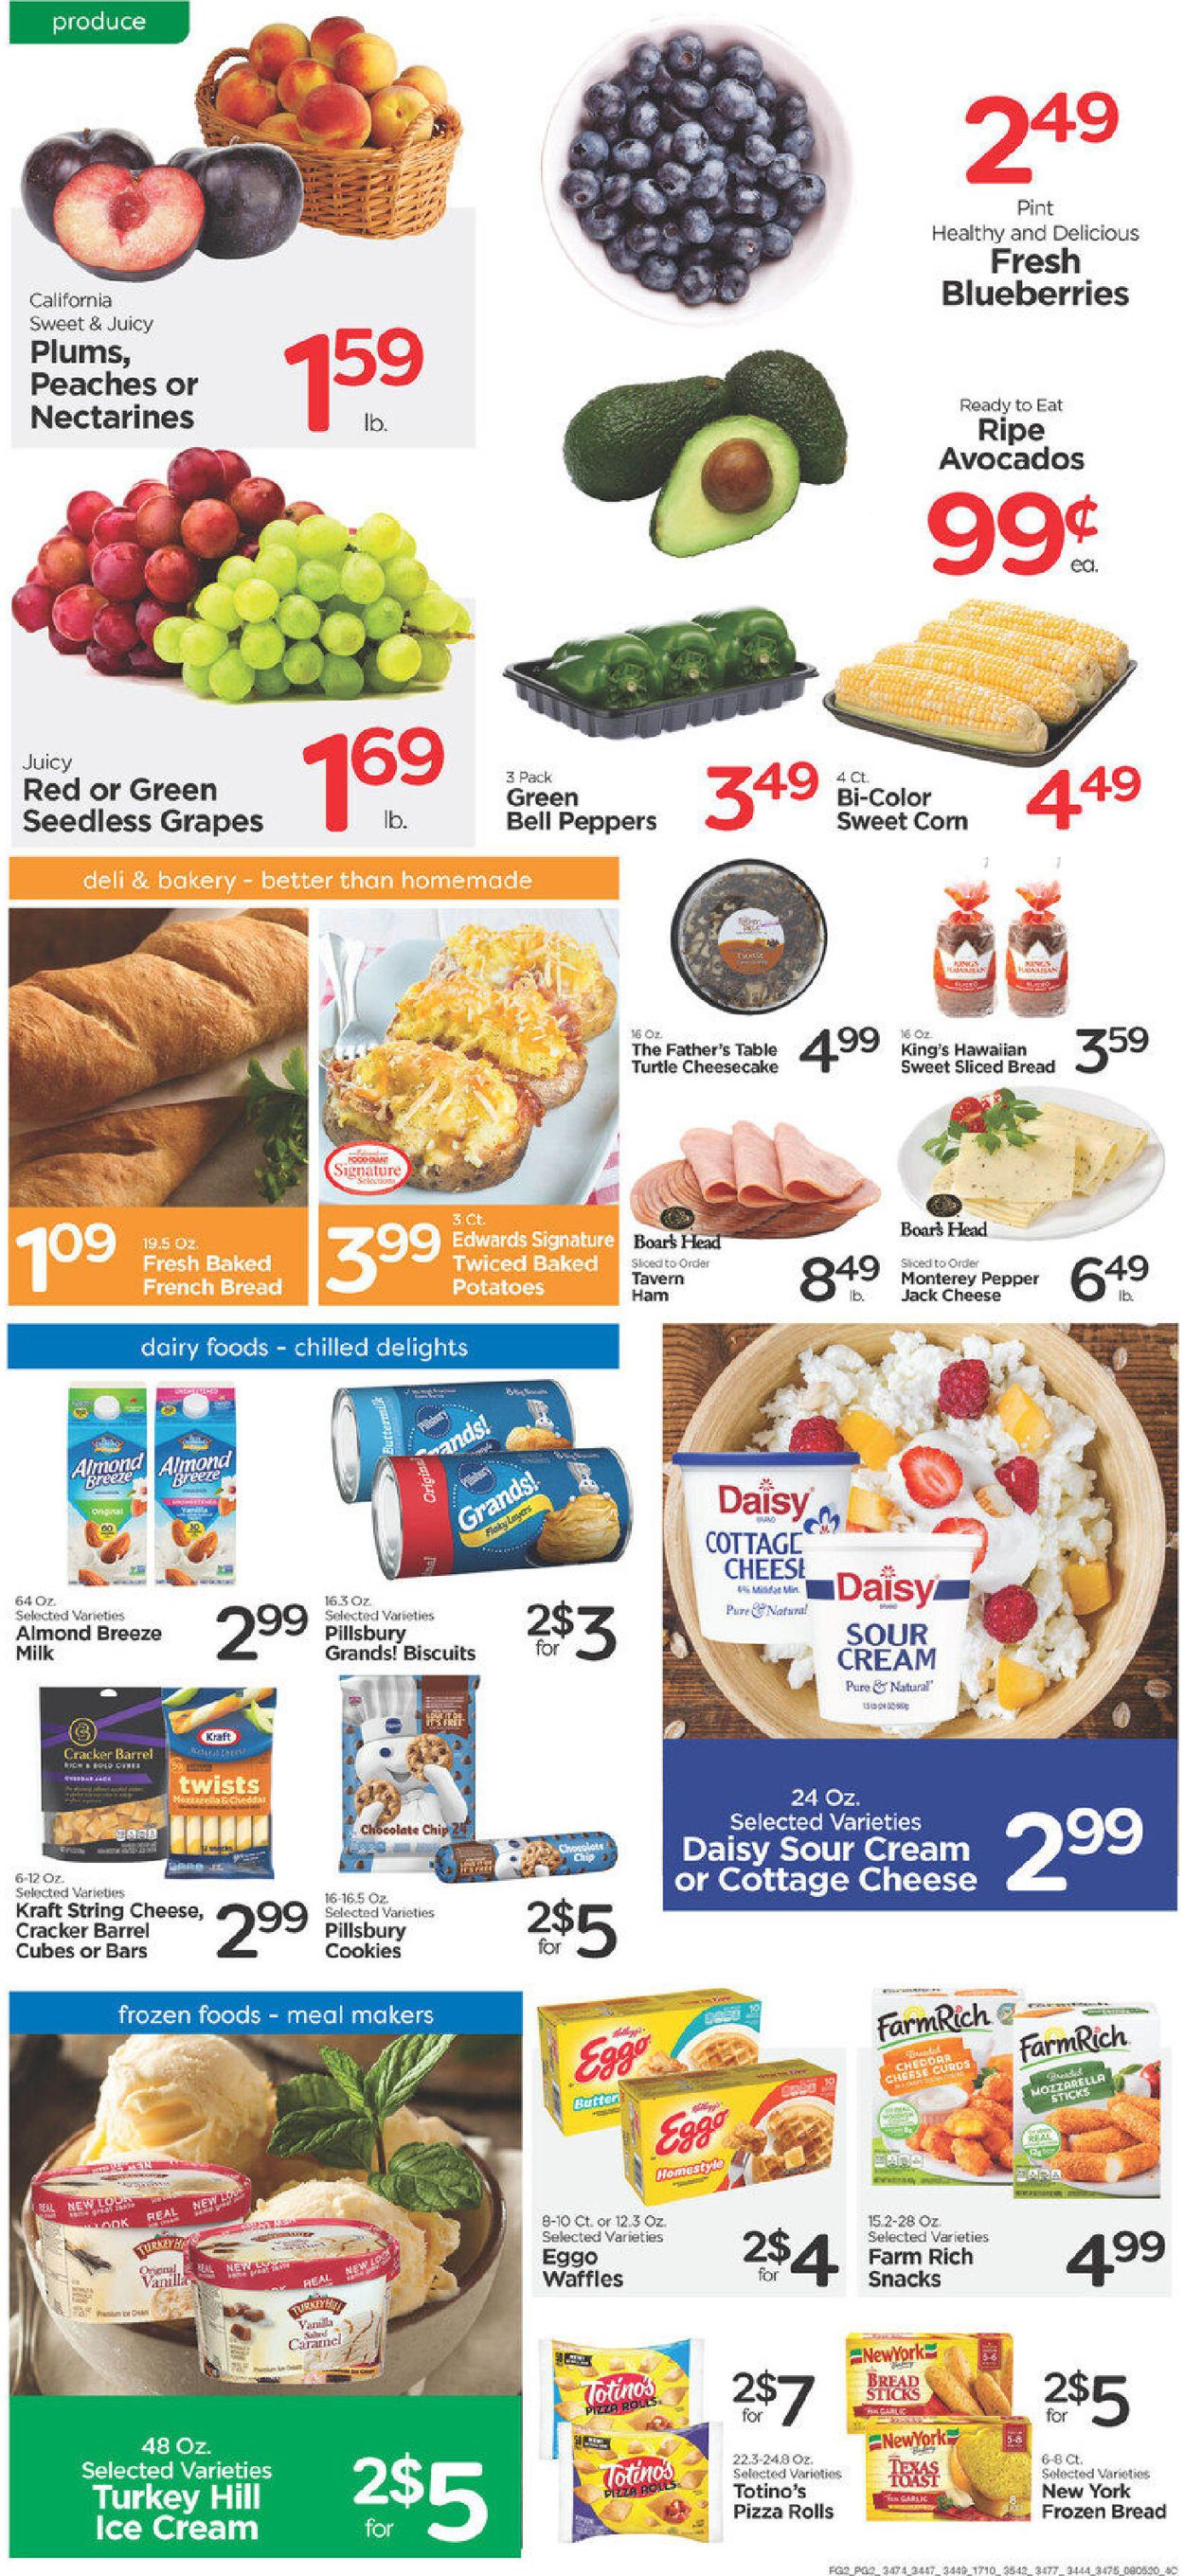 Catalogue Edwards Food Giant from 08/05/2020